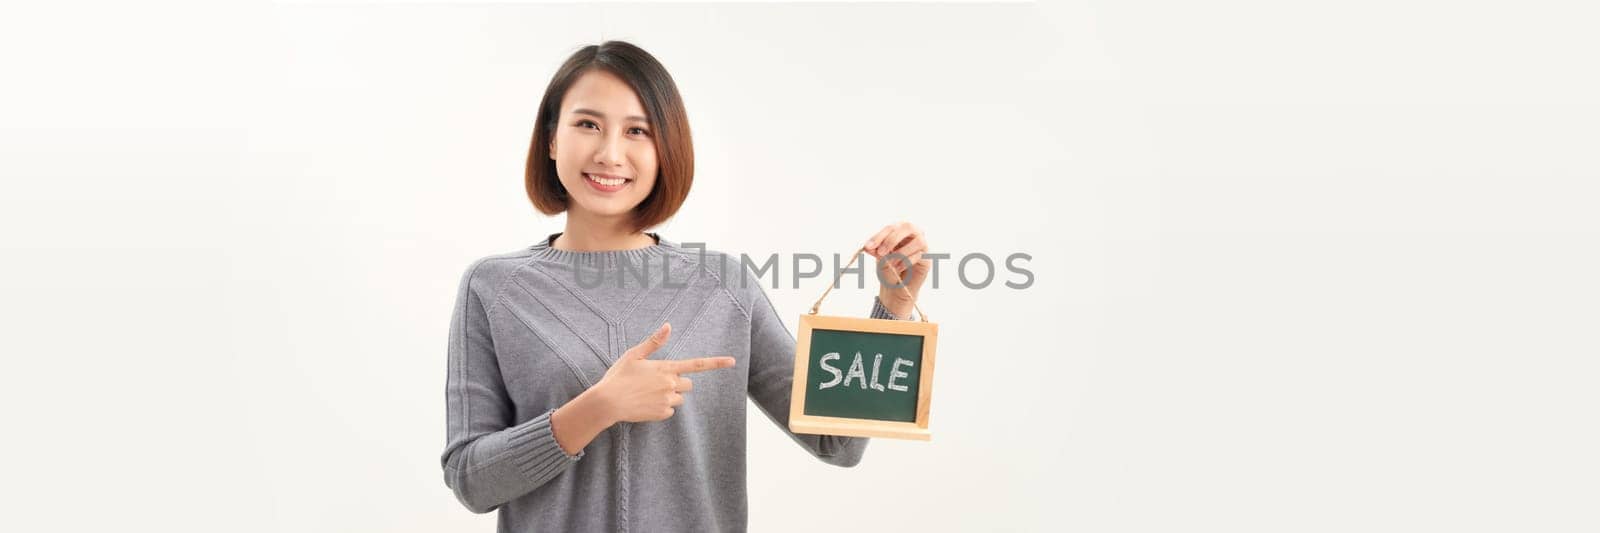 Beautiful asian woman in barista apron holding SALE word blackboard sign on white background